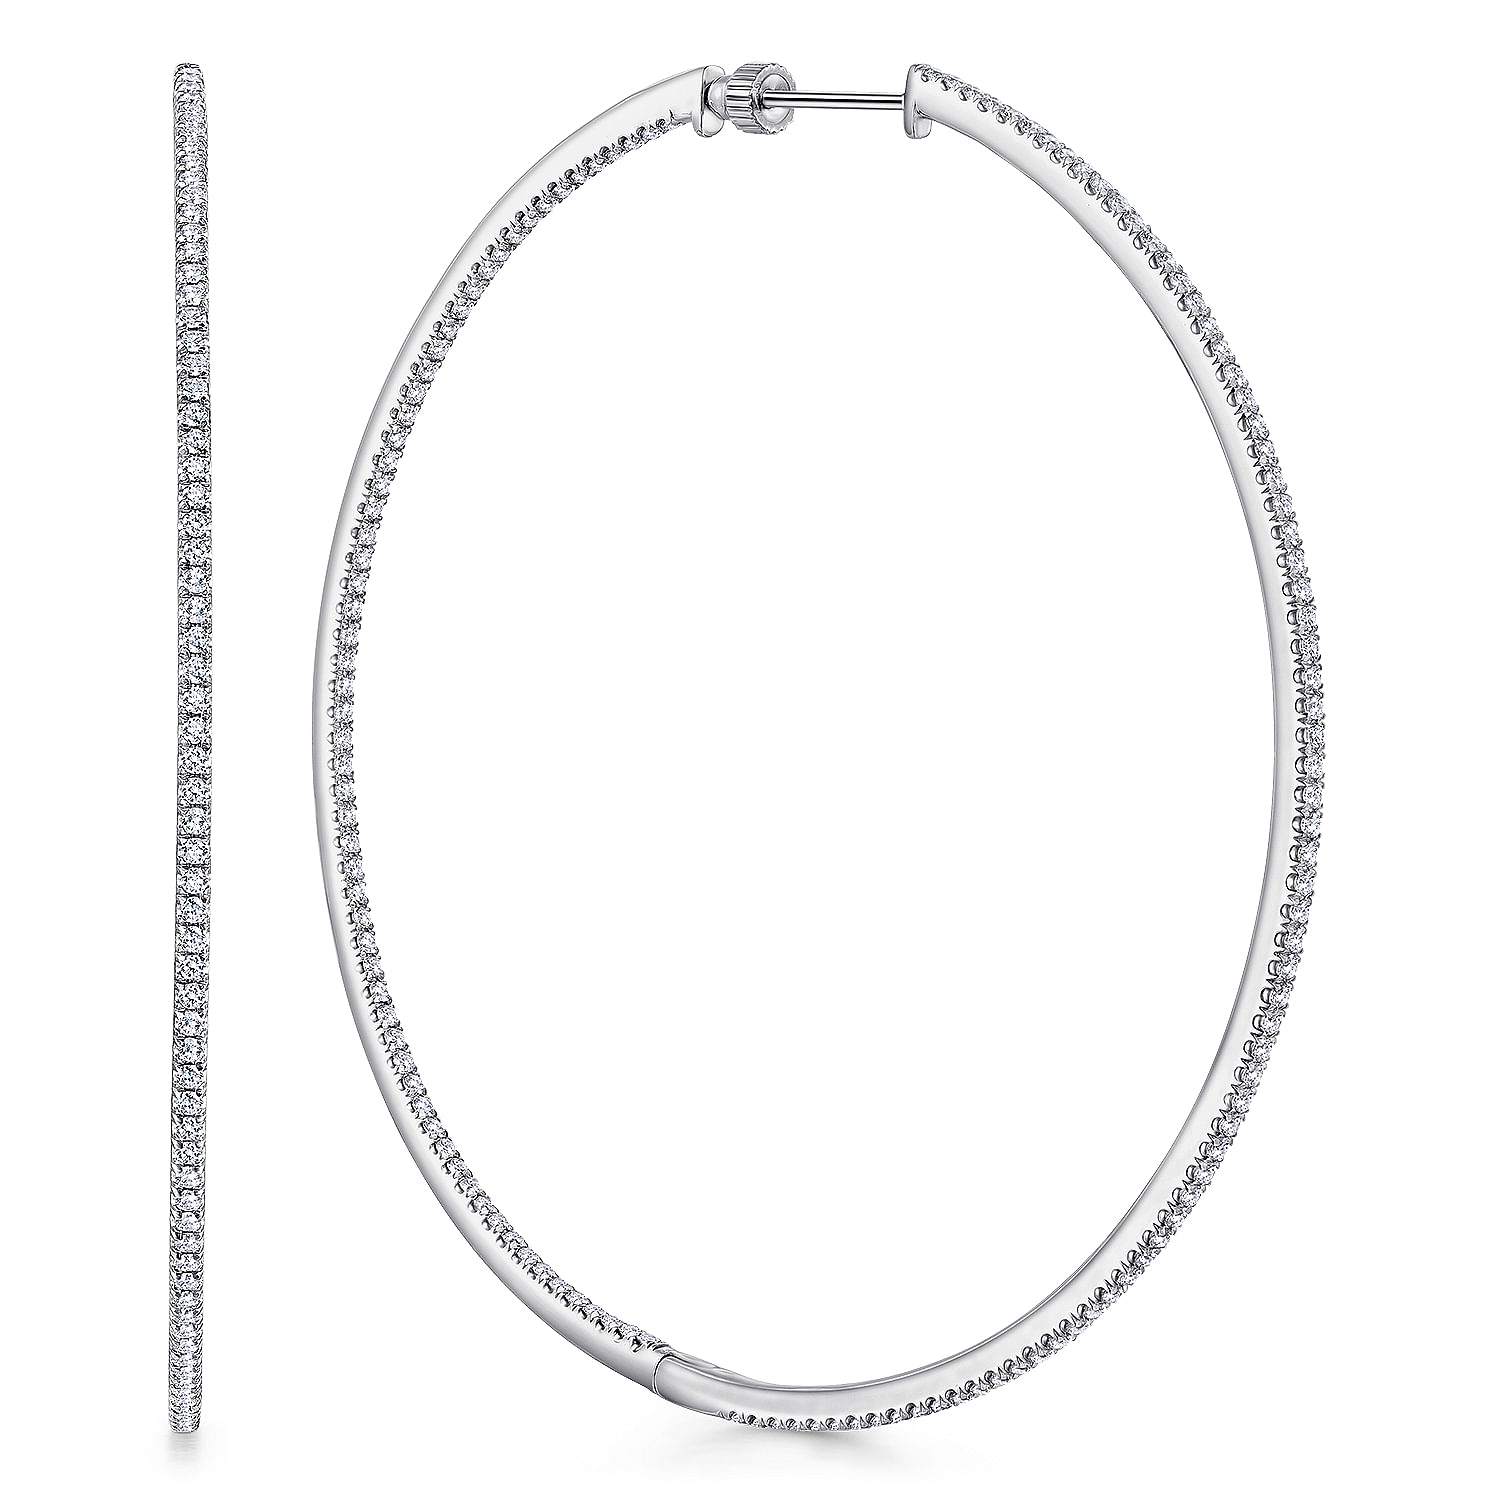 14K White Gold French Pavé 70mm Round Inside Out Diamond Hoop Earrings